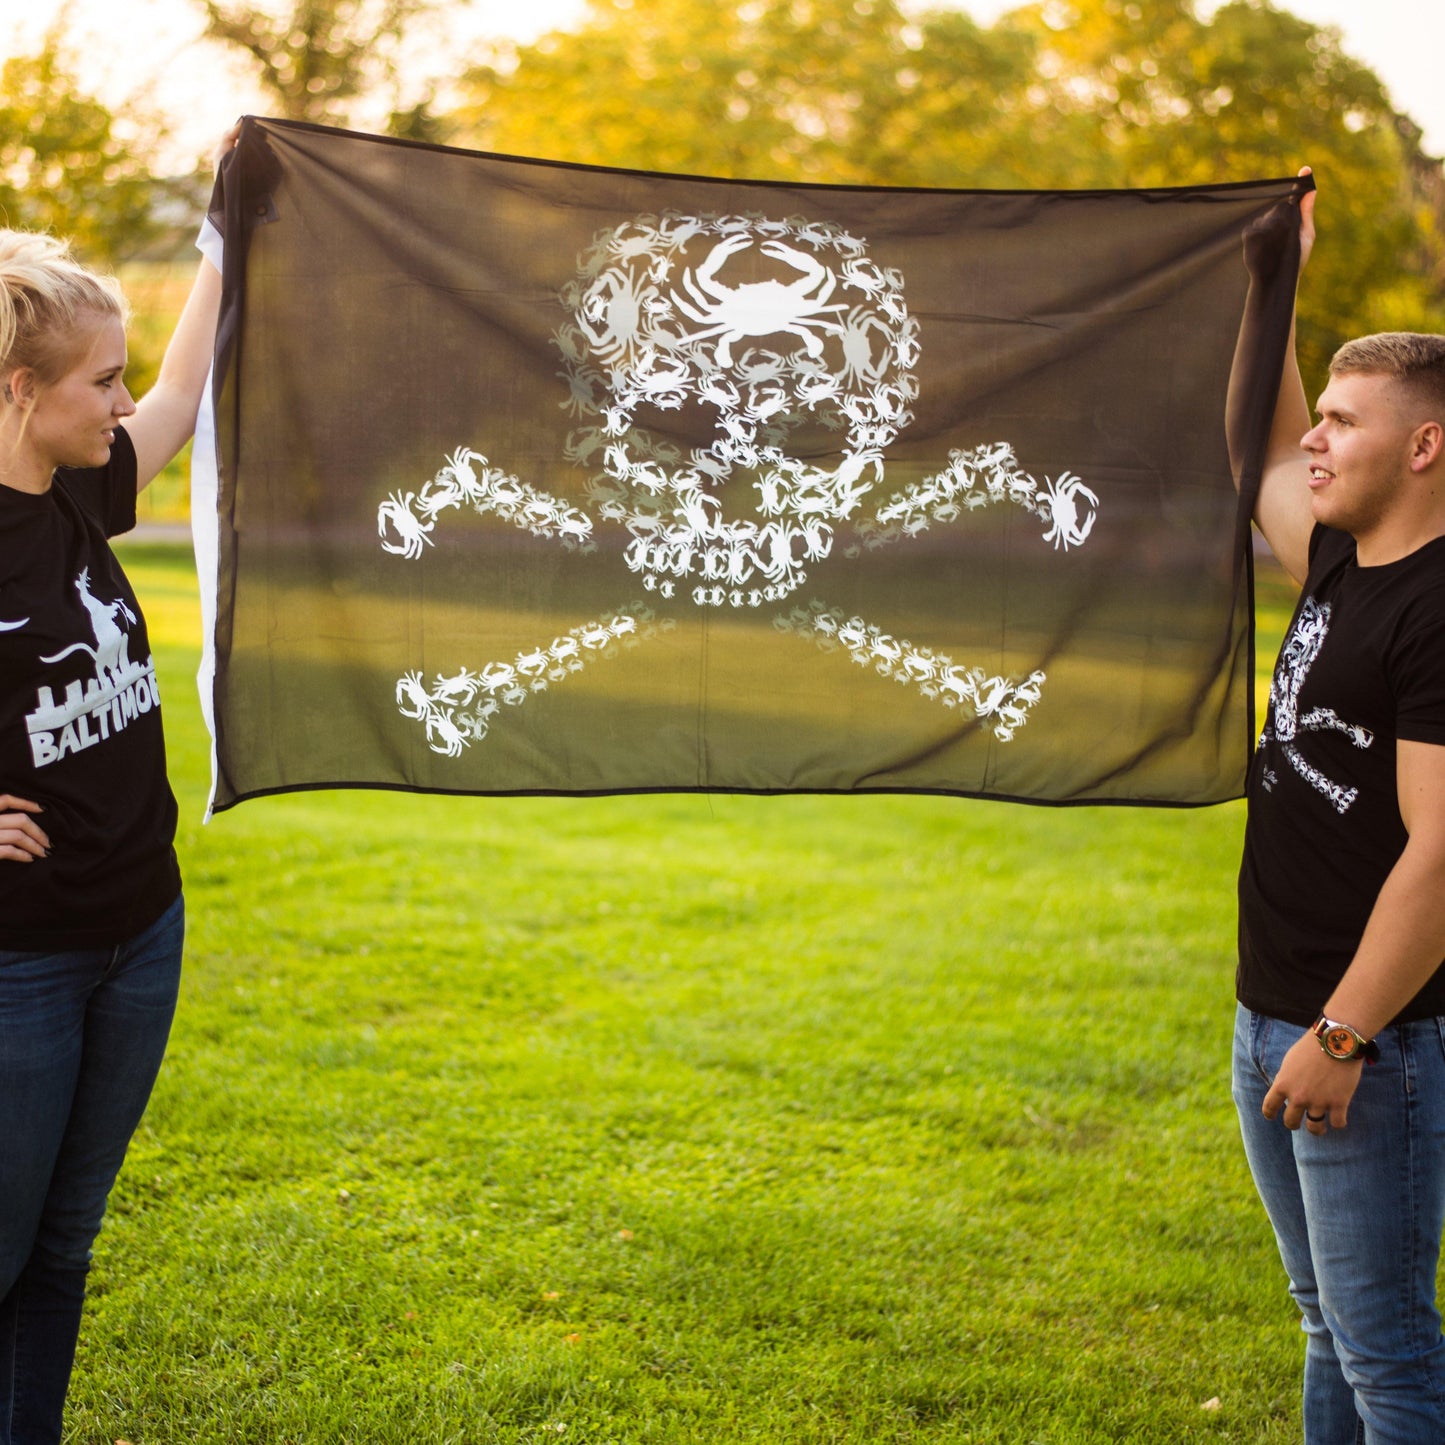 Skull Crab / Flag - Route One Apparel